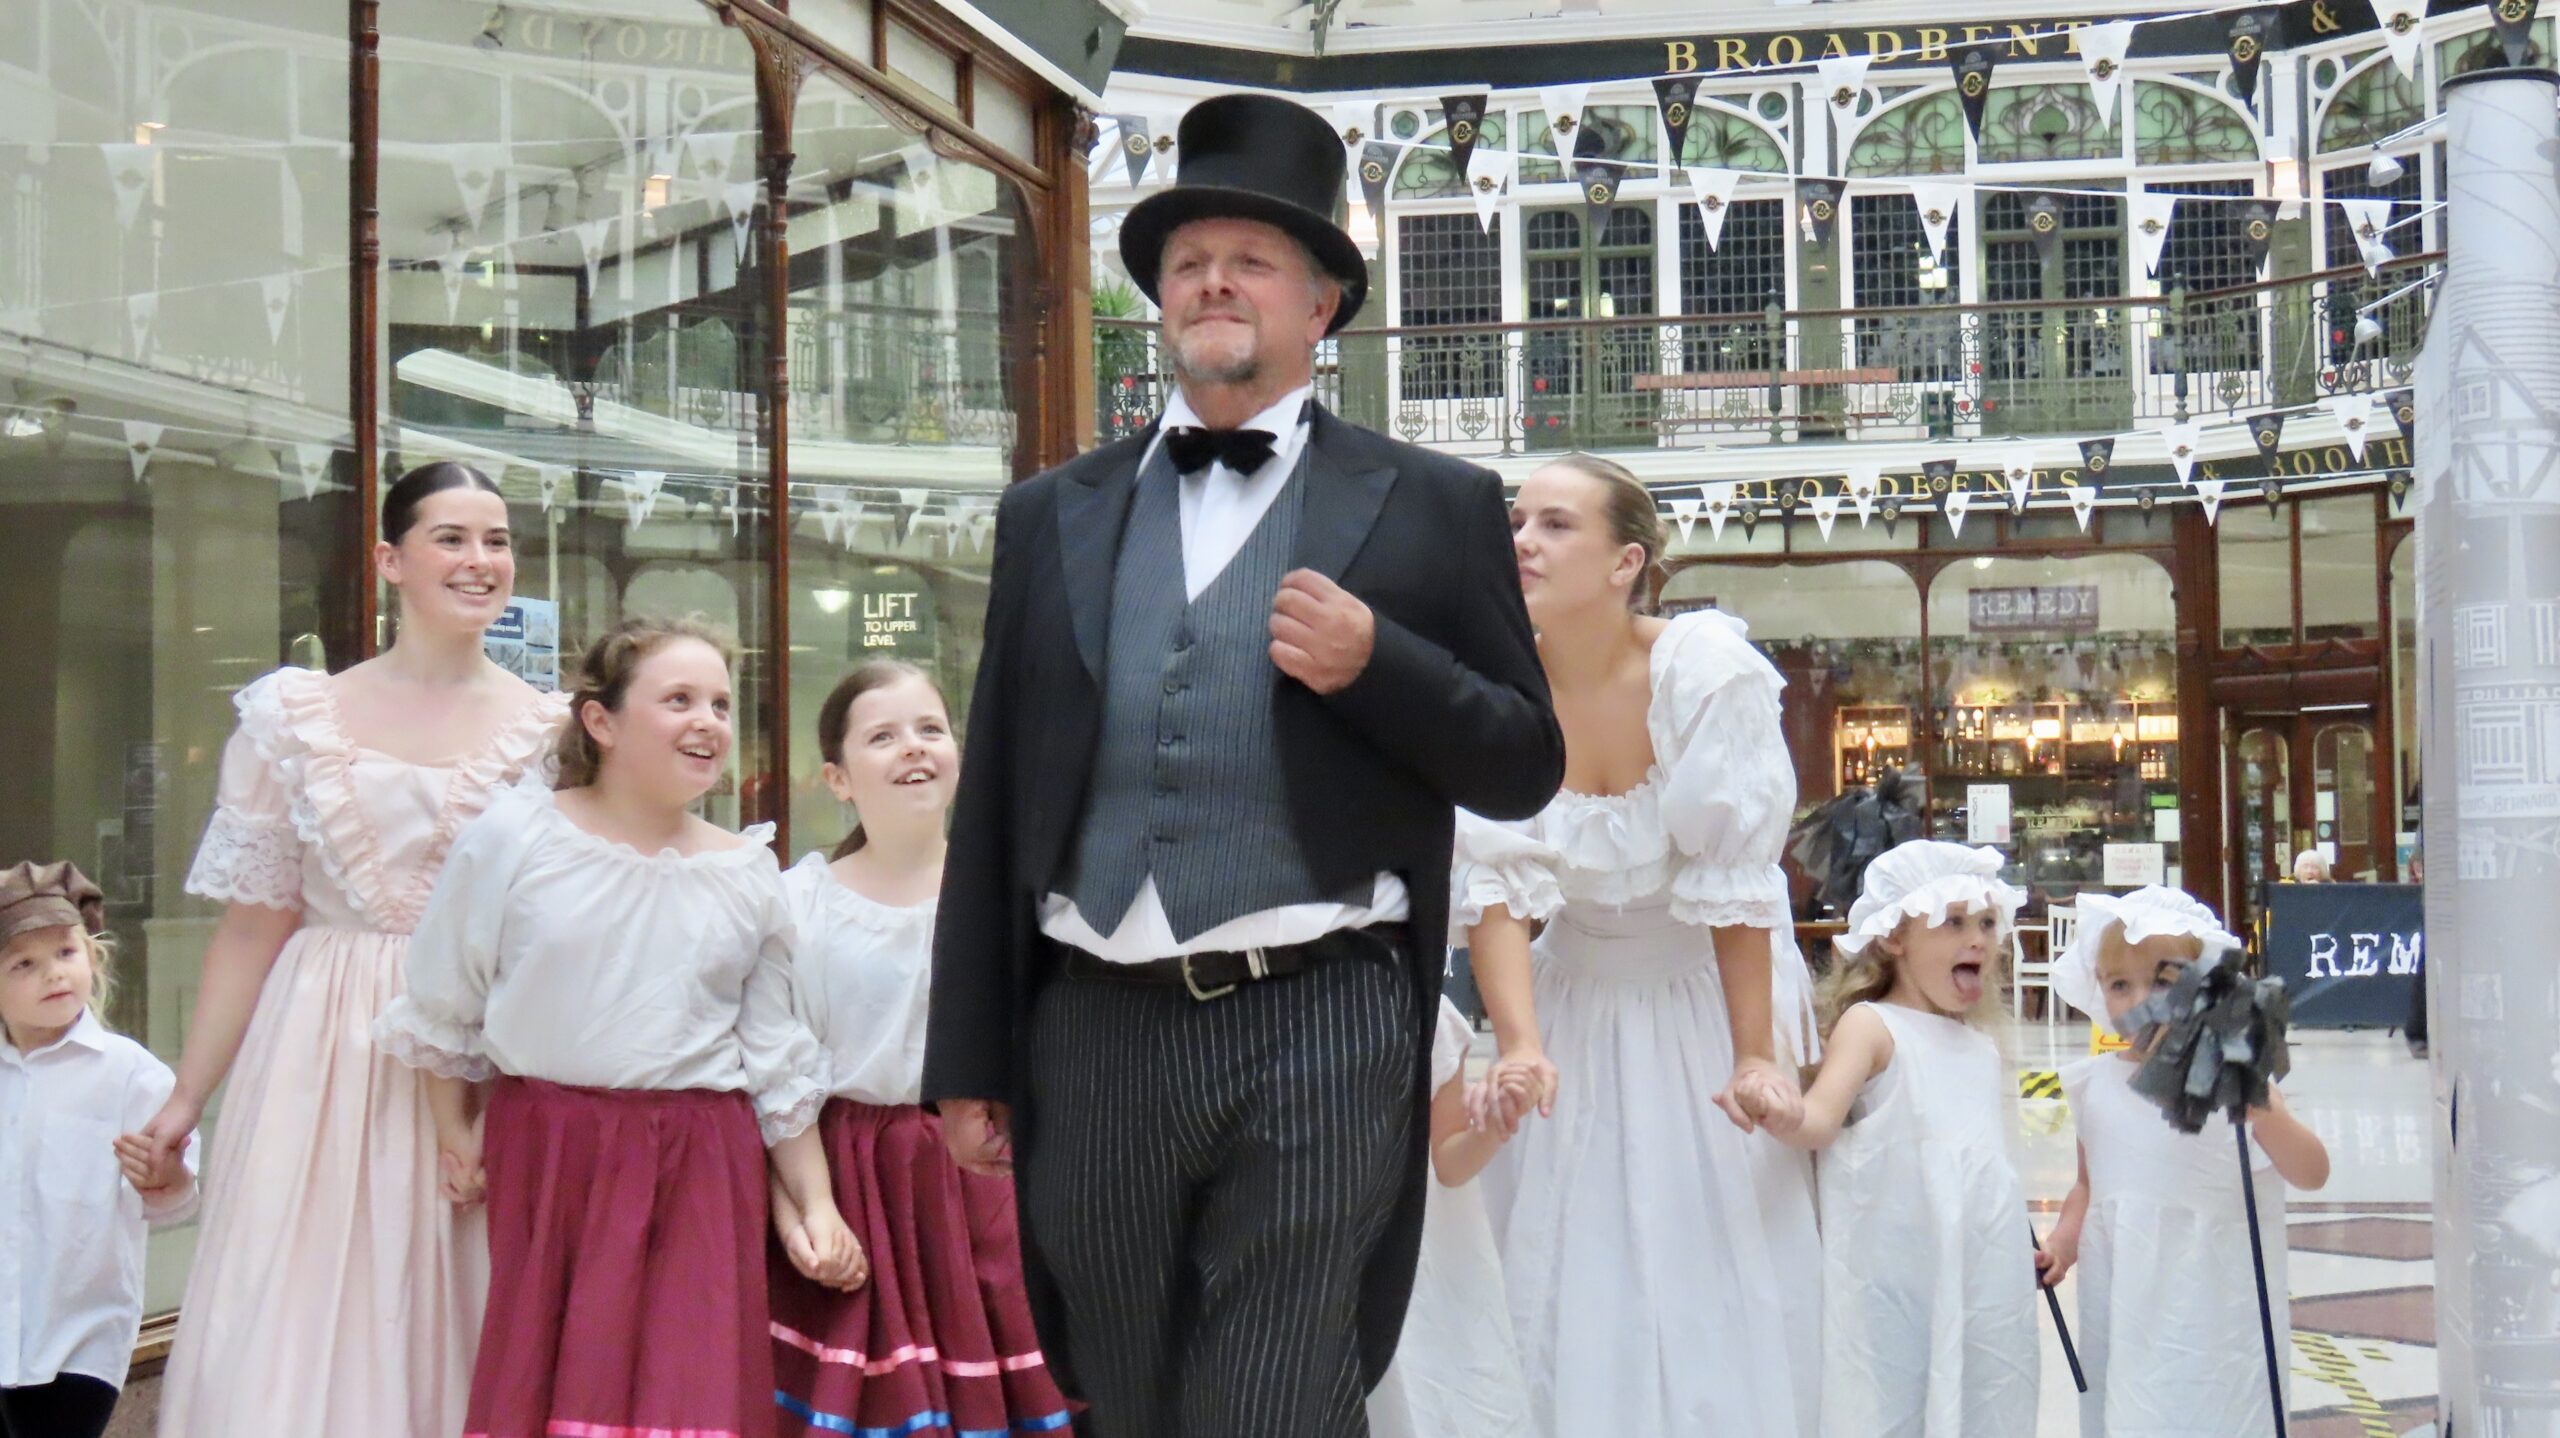 People are being invited to enjoy a very special Victorian Weekend as the historic Wayfarers Shopping Arcade in Southport celebrates its 125th anniversary.Master of Ceremonies Jordan Plunkett with children from the Alison Wright School of Dance and Drama. Photo by Andrew Brown Stand Up For Southport